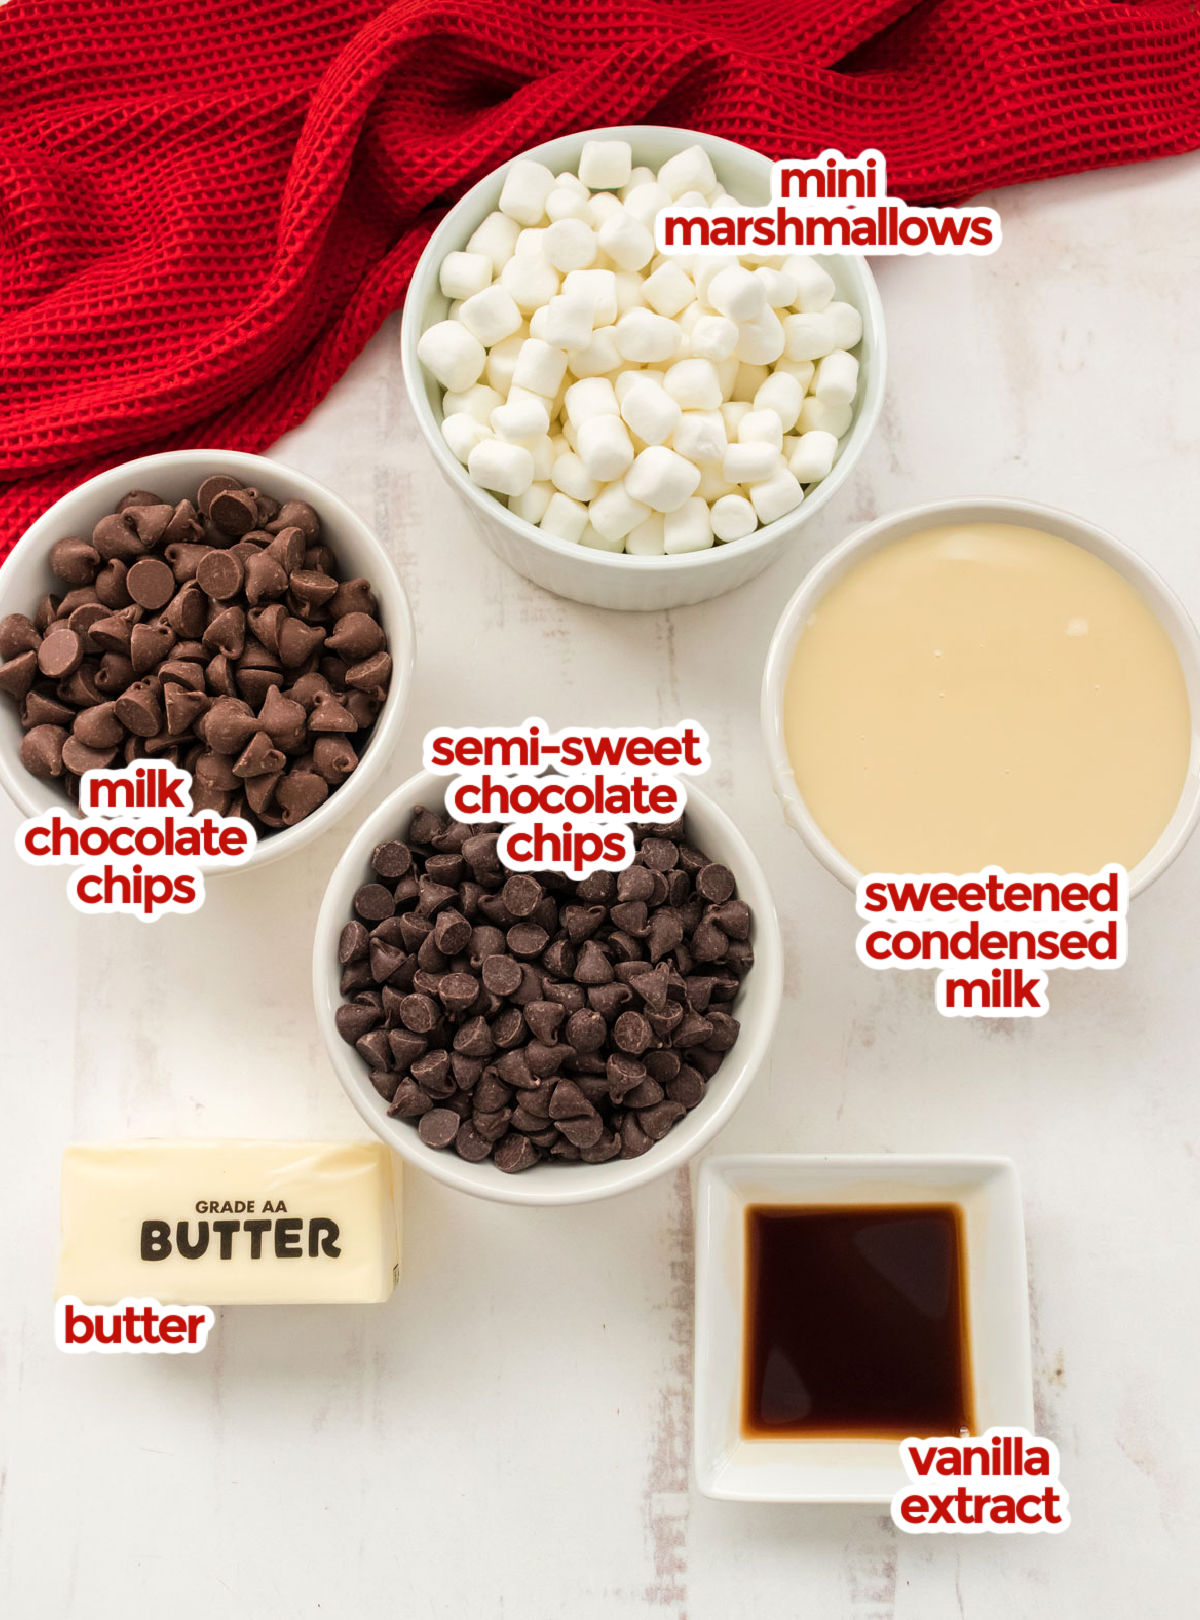 All the ingredients you will need to make Rocky Road Fudge including mini marshmallows, sweetened condensed milk, chocolate chips, butter and vanilla extract.